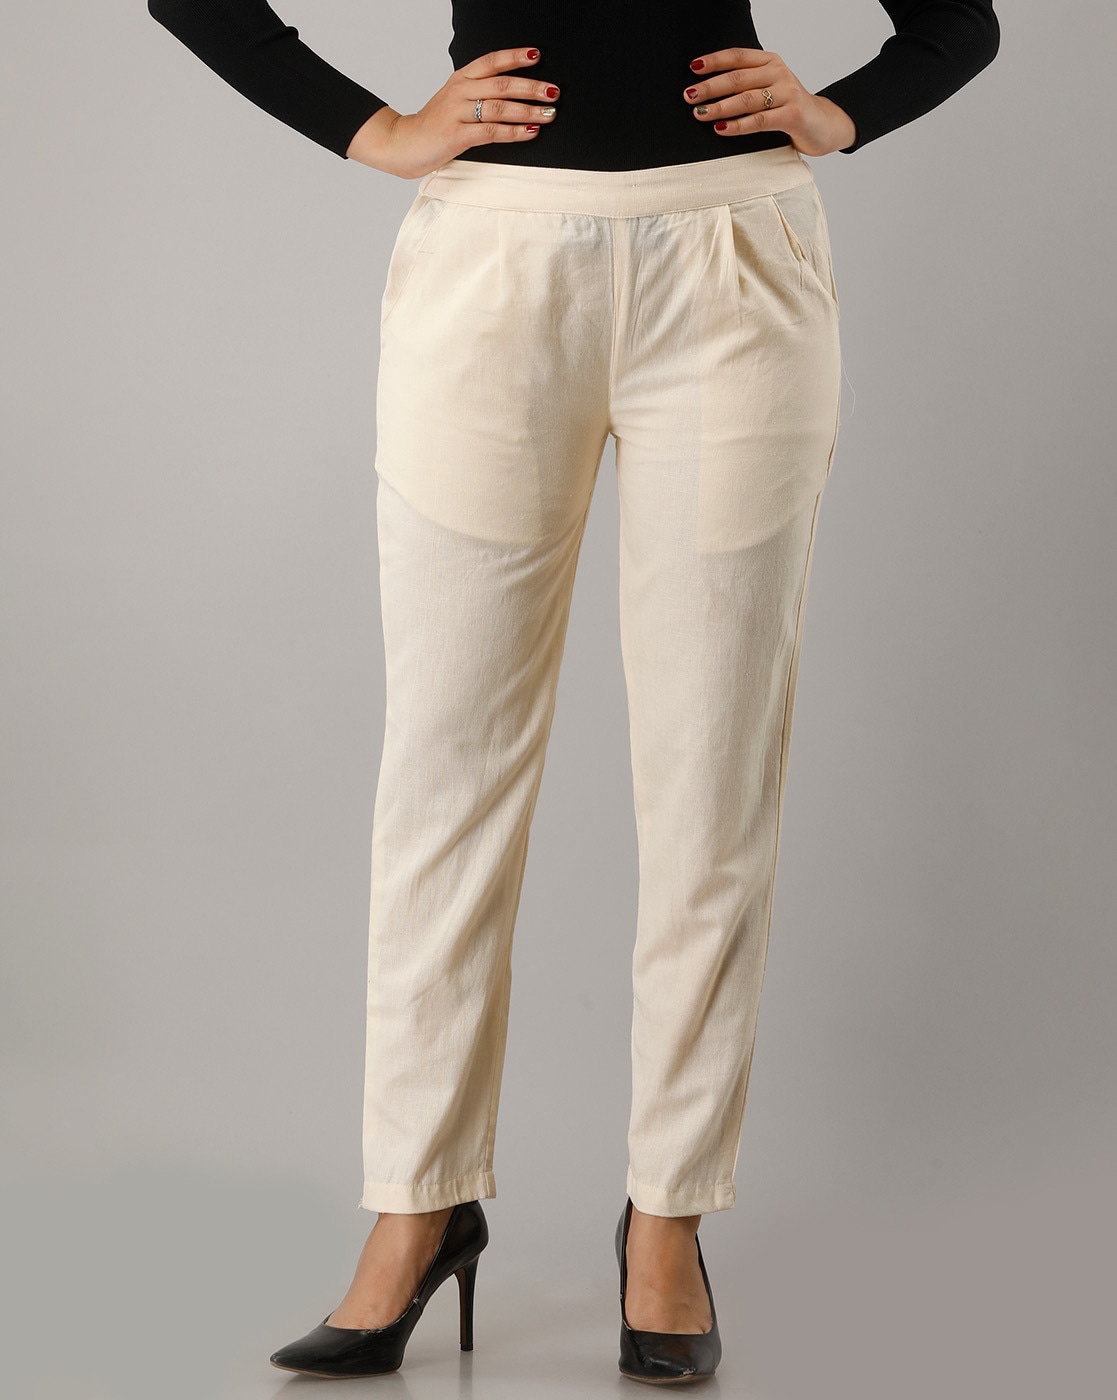 Ladies White Cotton Cigarette Pants at Rs 246/piece | महिलाओ की पैंट in  Ahmedabad | ID: 27620015533